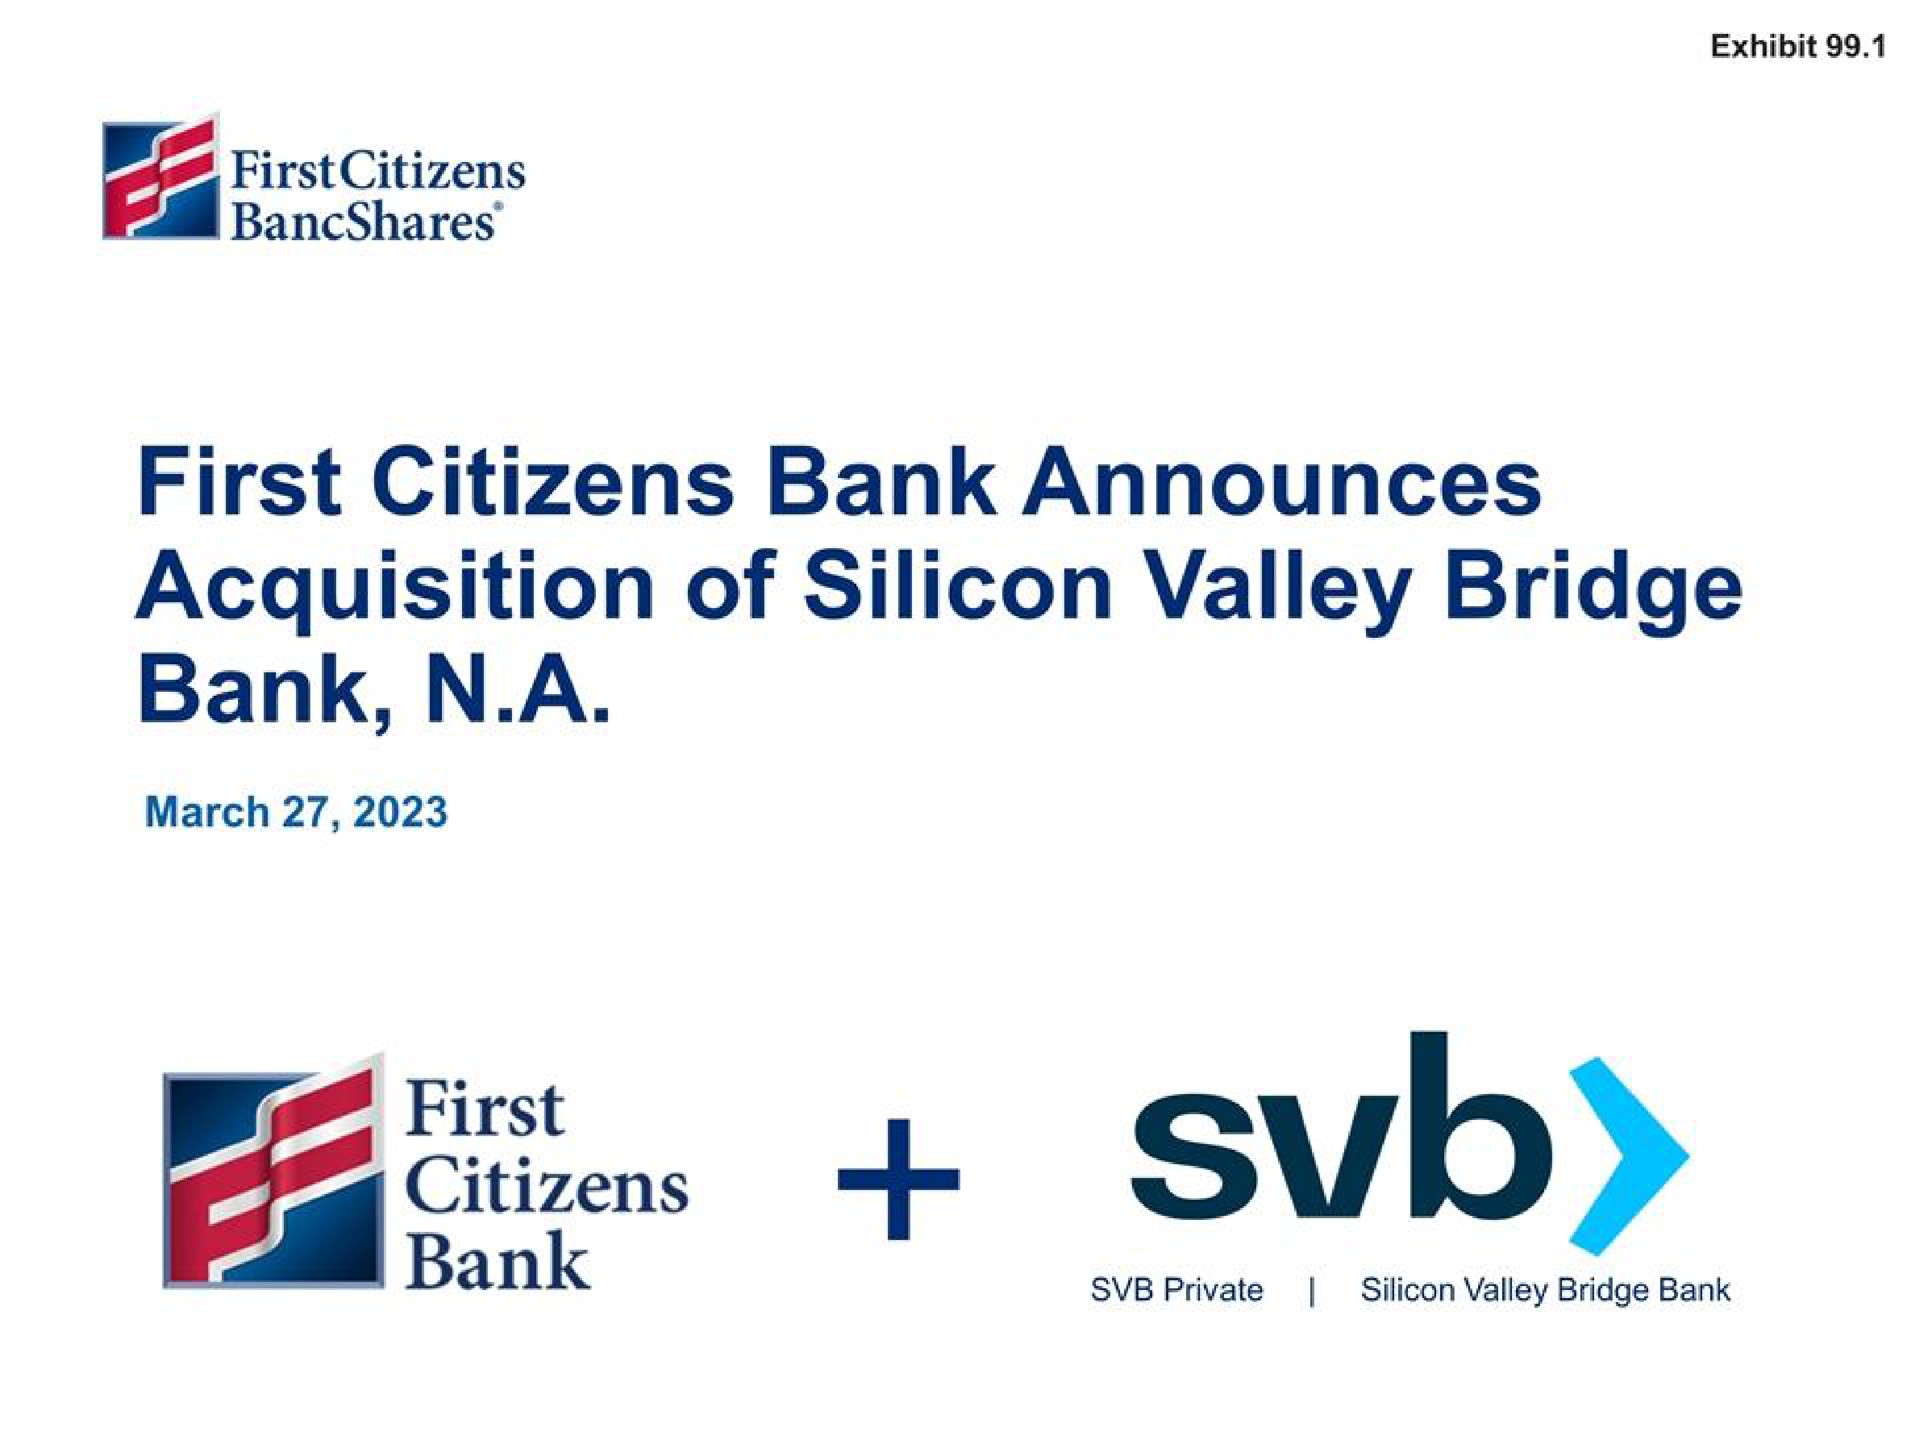 first citizens bank announces acquisition of silicon valley bridge bank a bank | First Citizens BancShares